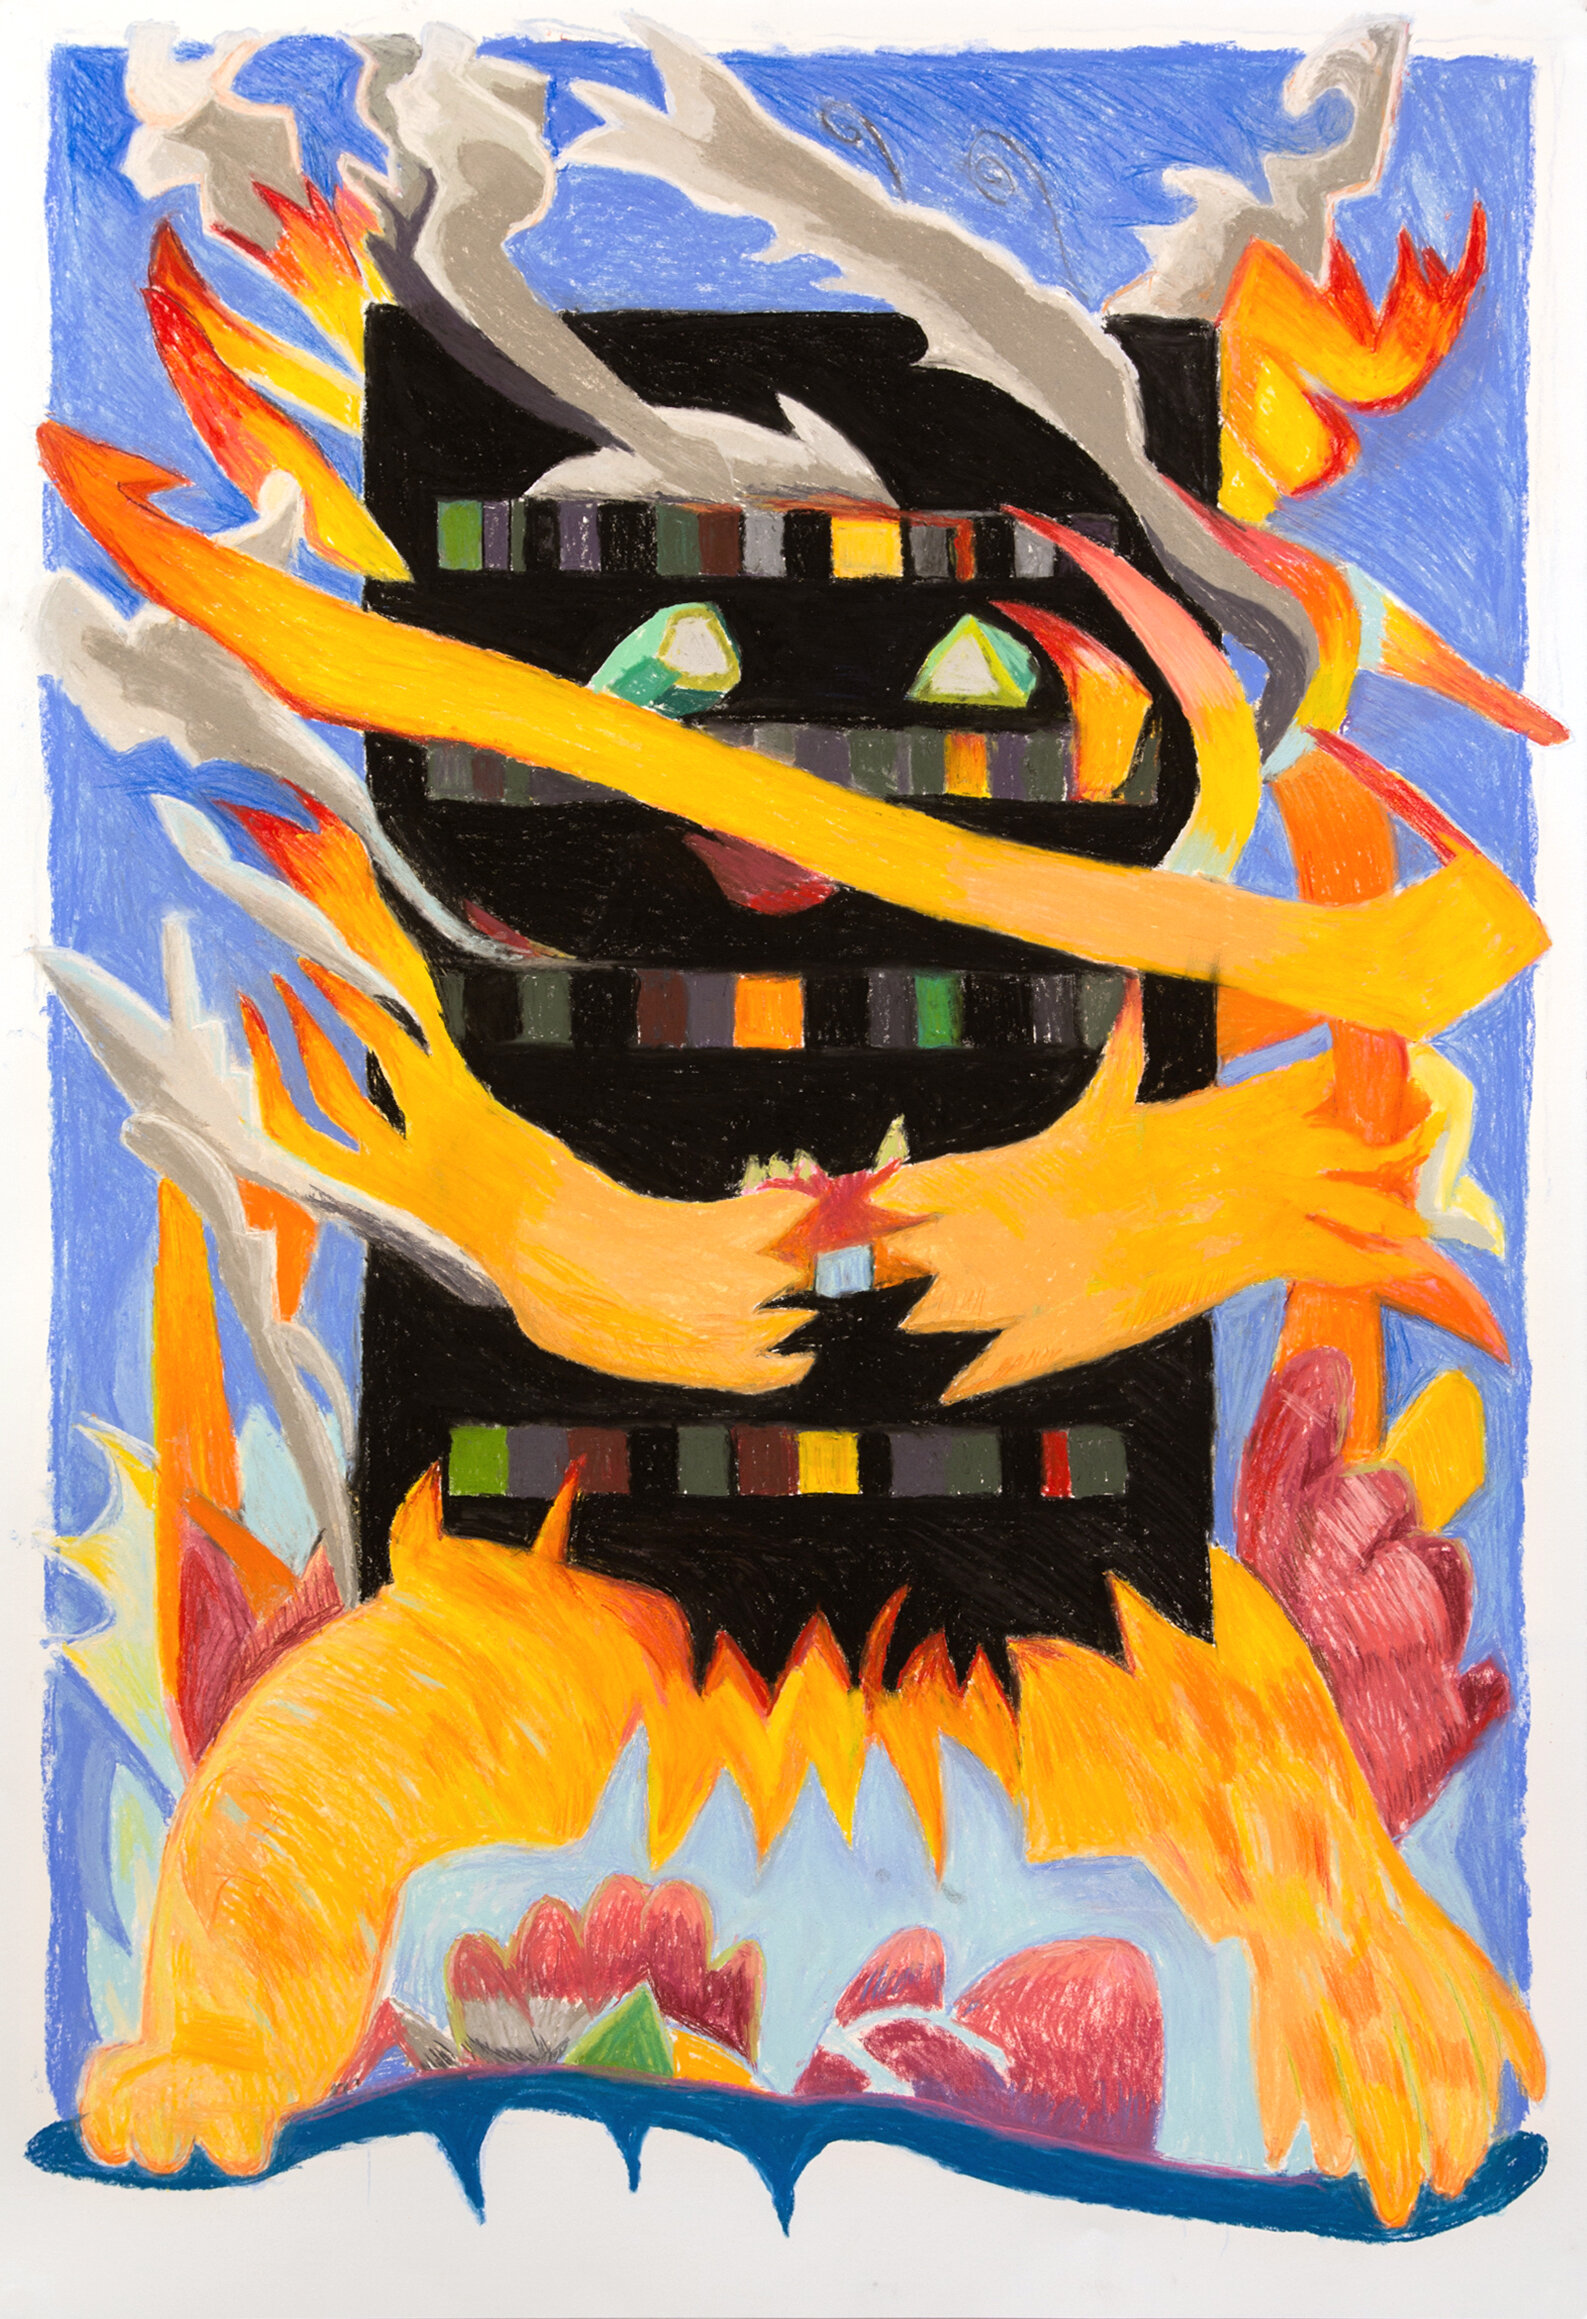  Apartment Arsonist, 2019 Chalk pastel on cotton rag paper, 44 x 30.5 inches Inspired by the horrific and tragic 2017 Grenfell tower fire in London, this work features a figure with limbs of fire and a body of a blackened apartment building, surround